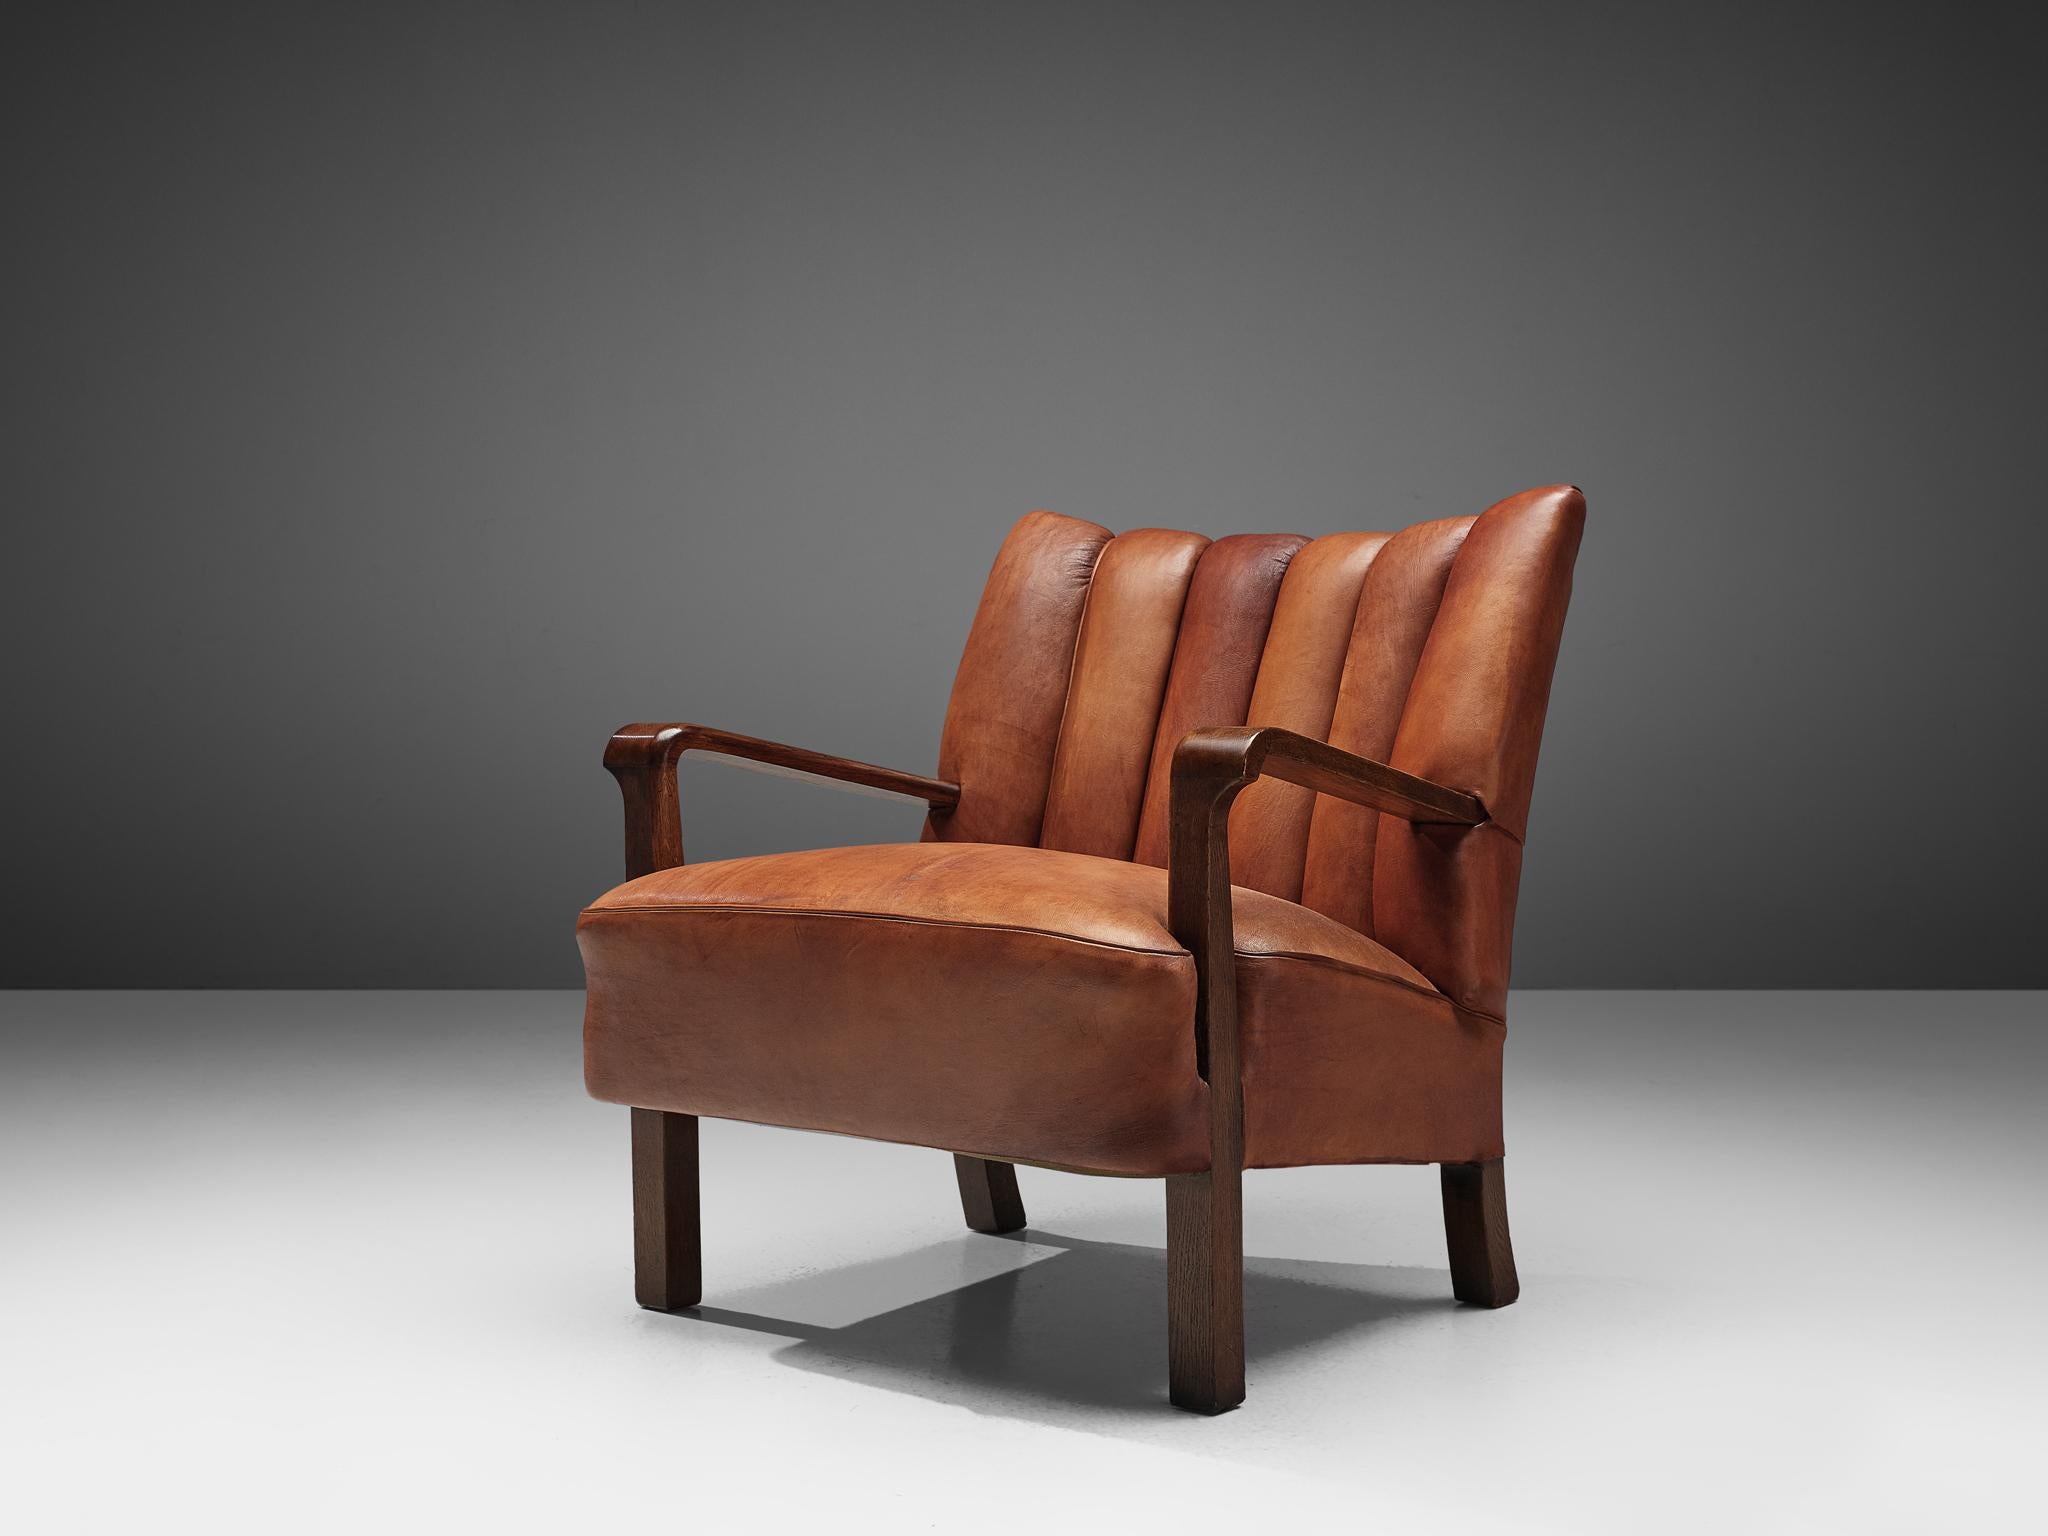 Acton Bjøn for cabinetmaker A.J. Iversen, armchair, Niger leather, patinated oak, Denmark, 1930s.

Early and rare lounge chair by Acton Bjørn in a beautiful cognac colored Niger leather with patinated oak armrest. Warm and inviting piece with a